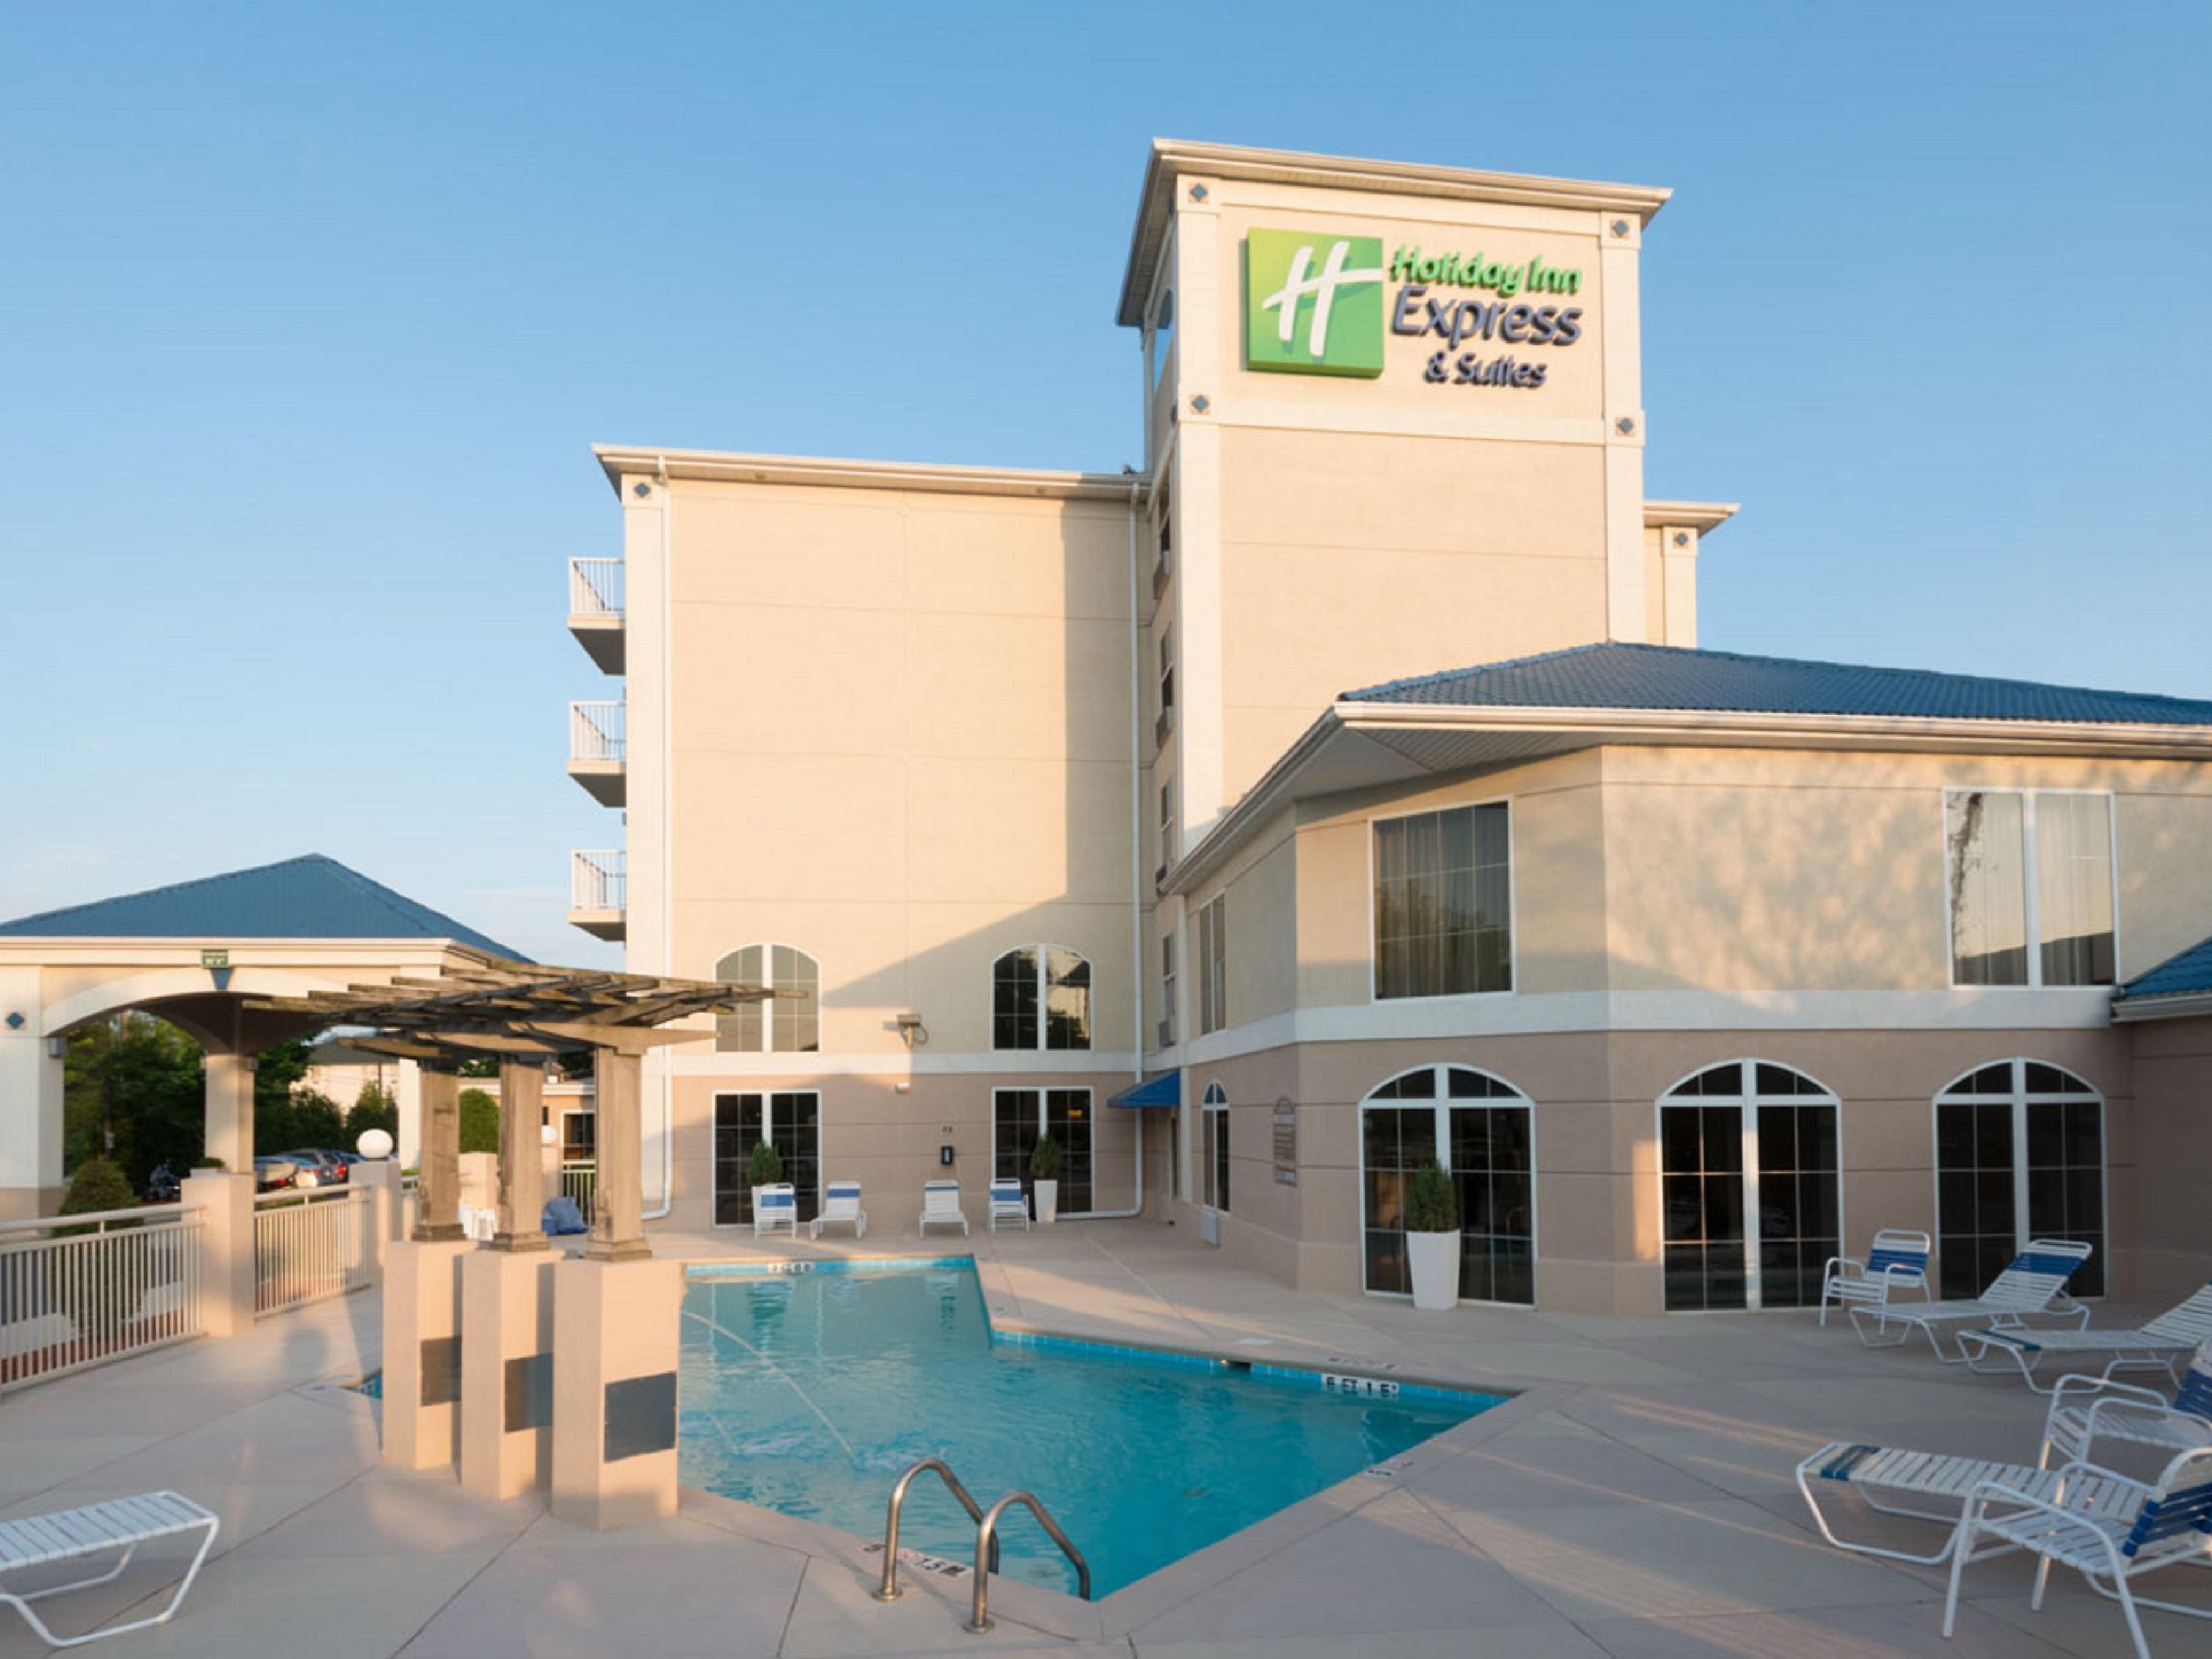 Holiday Inn Express And Suites Asheville 3498678336 4x3